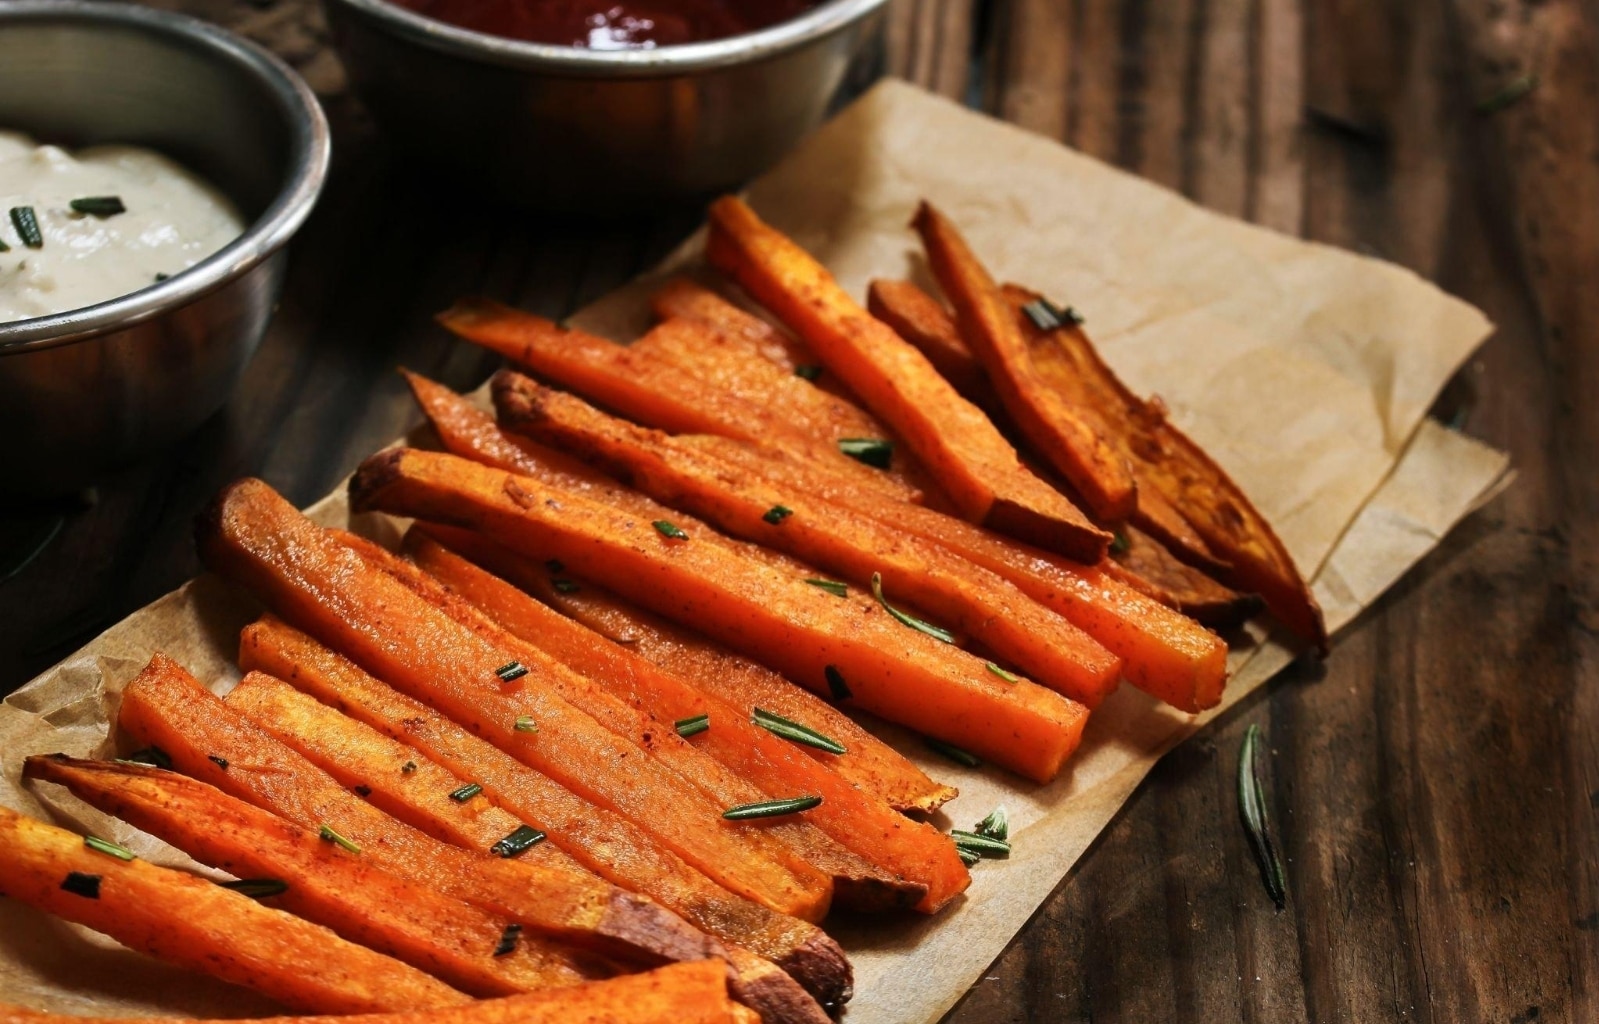 What Are Heirloom Carrots?